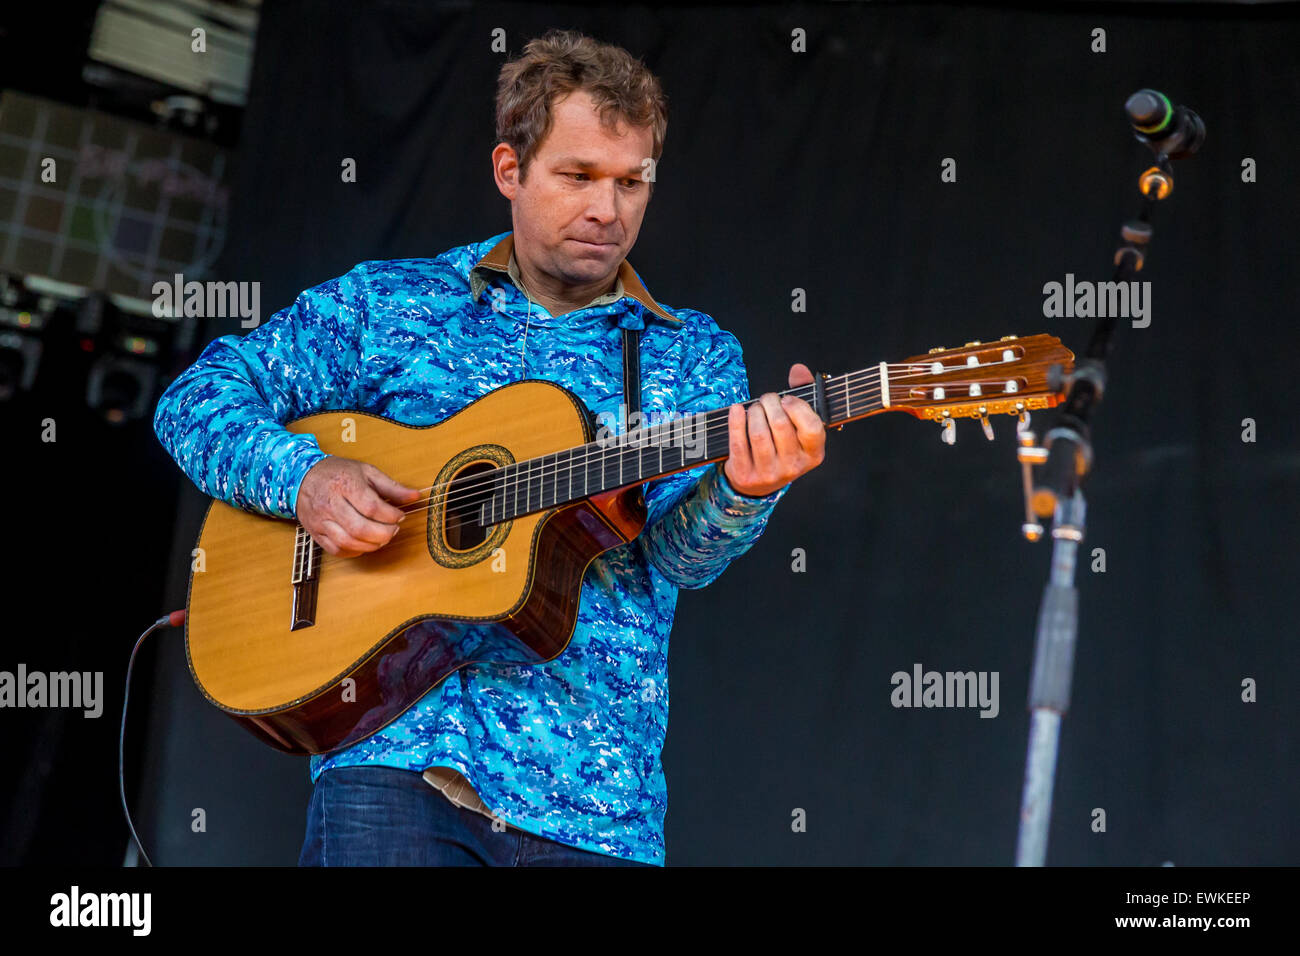 Clarkston, Michigan, USA. 27th June, 2015. Singer-songwriter SCOTTY EMERICK performing on the Good Times & Pick Up Lines Tour at DTE Energy Music Theatre in Clarkston Mi on June 27th 2015 © Marc Nader/ZUMA Wire/Alamy Live News Stock Photo